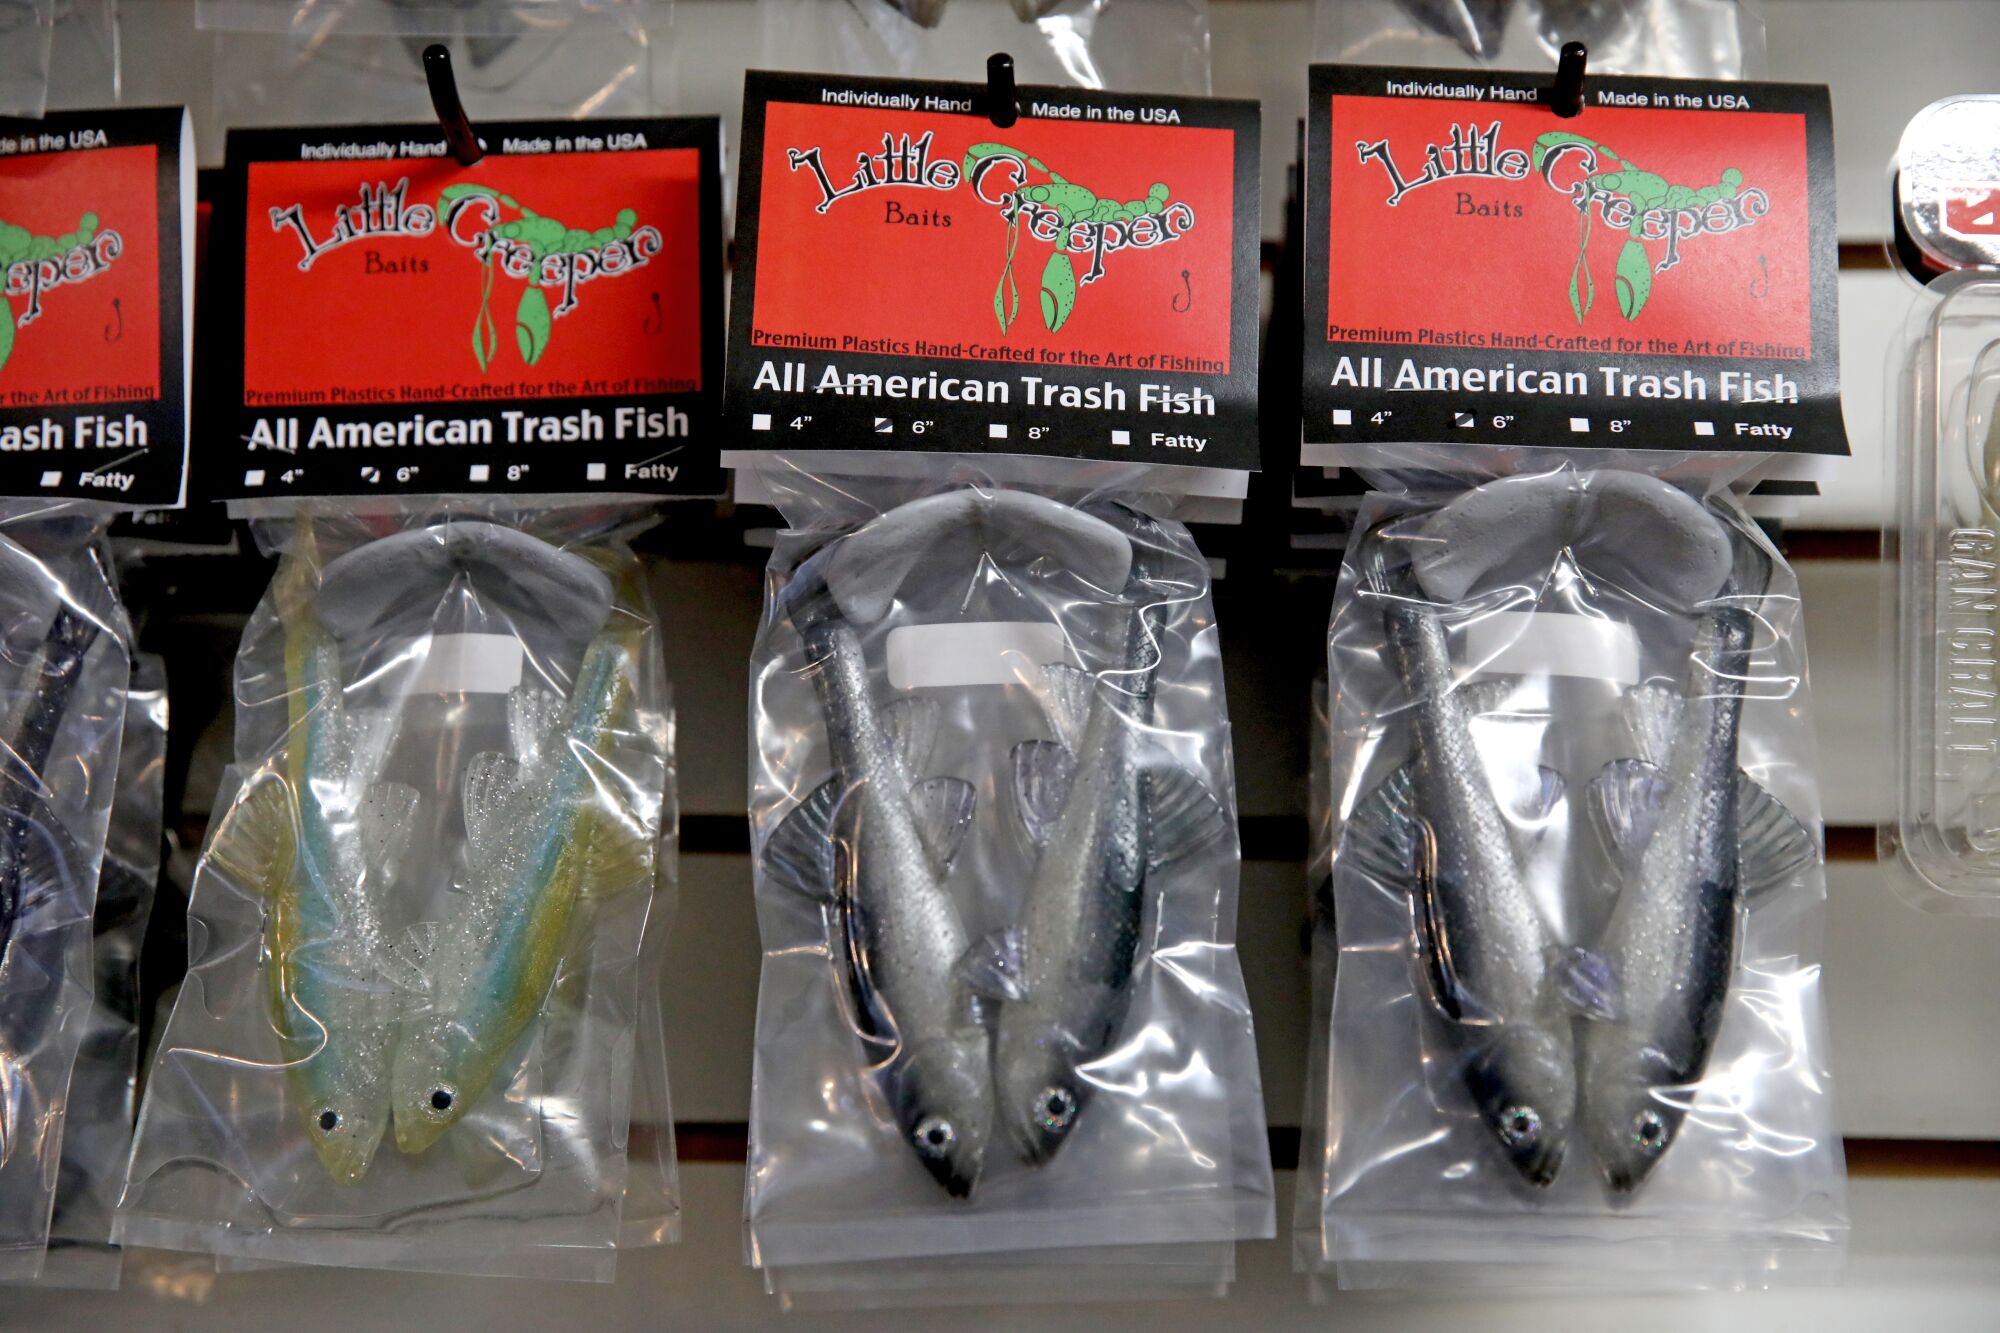 Fishing lures designed to look like hitch hang on a display rack.